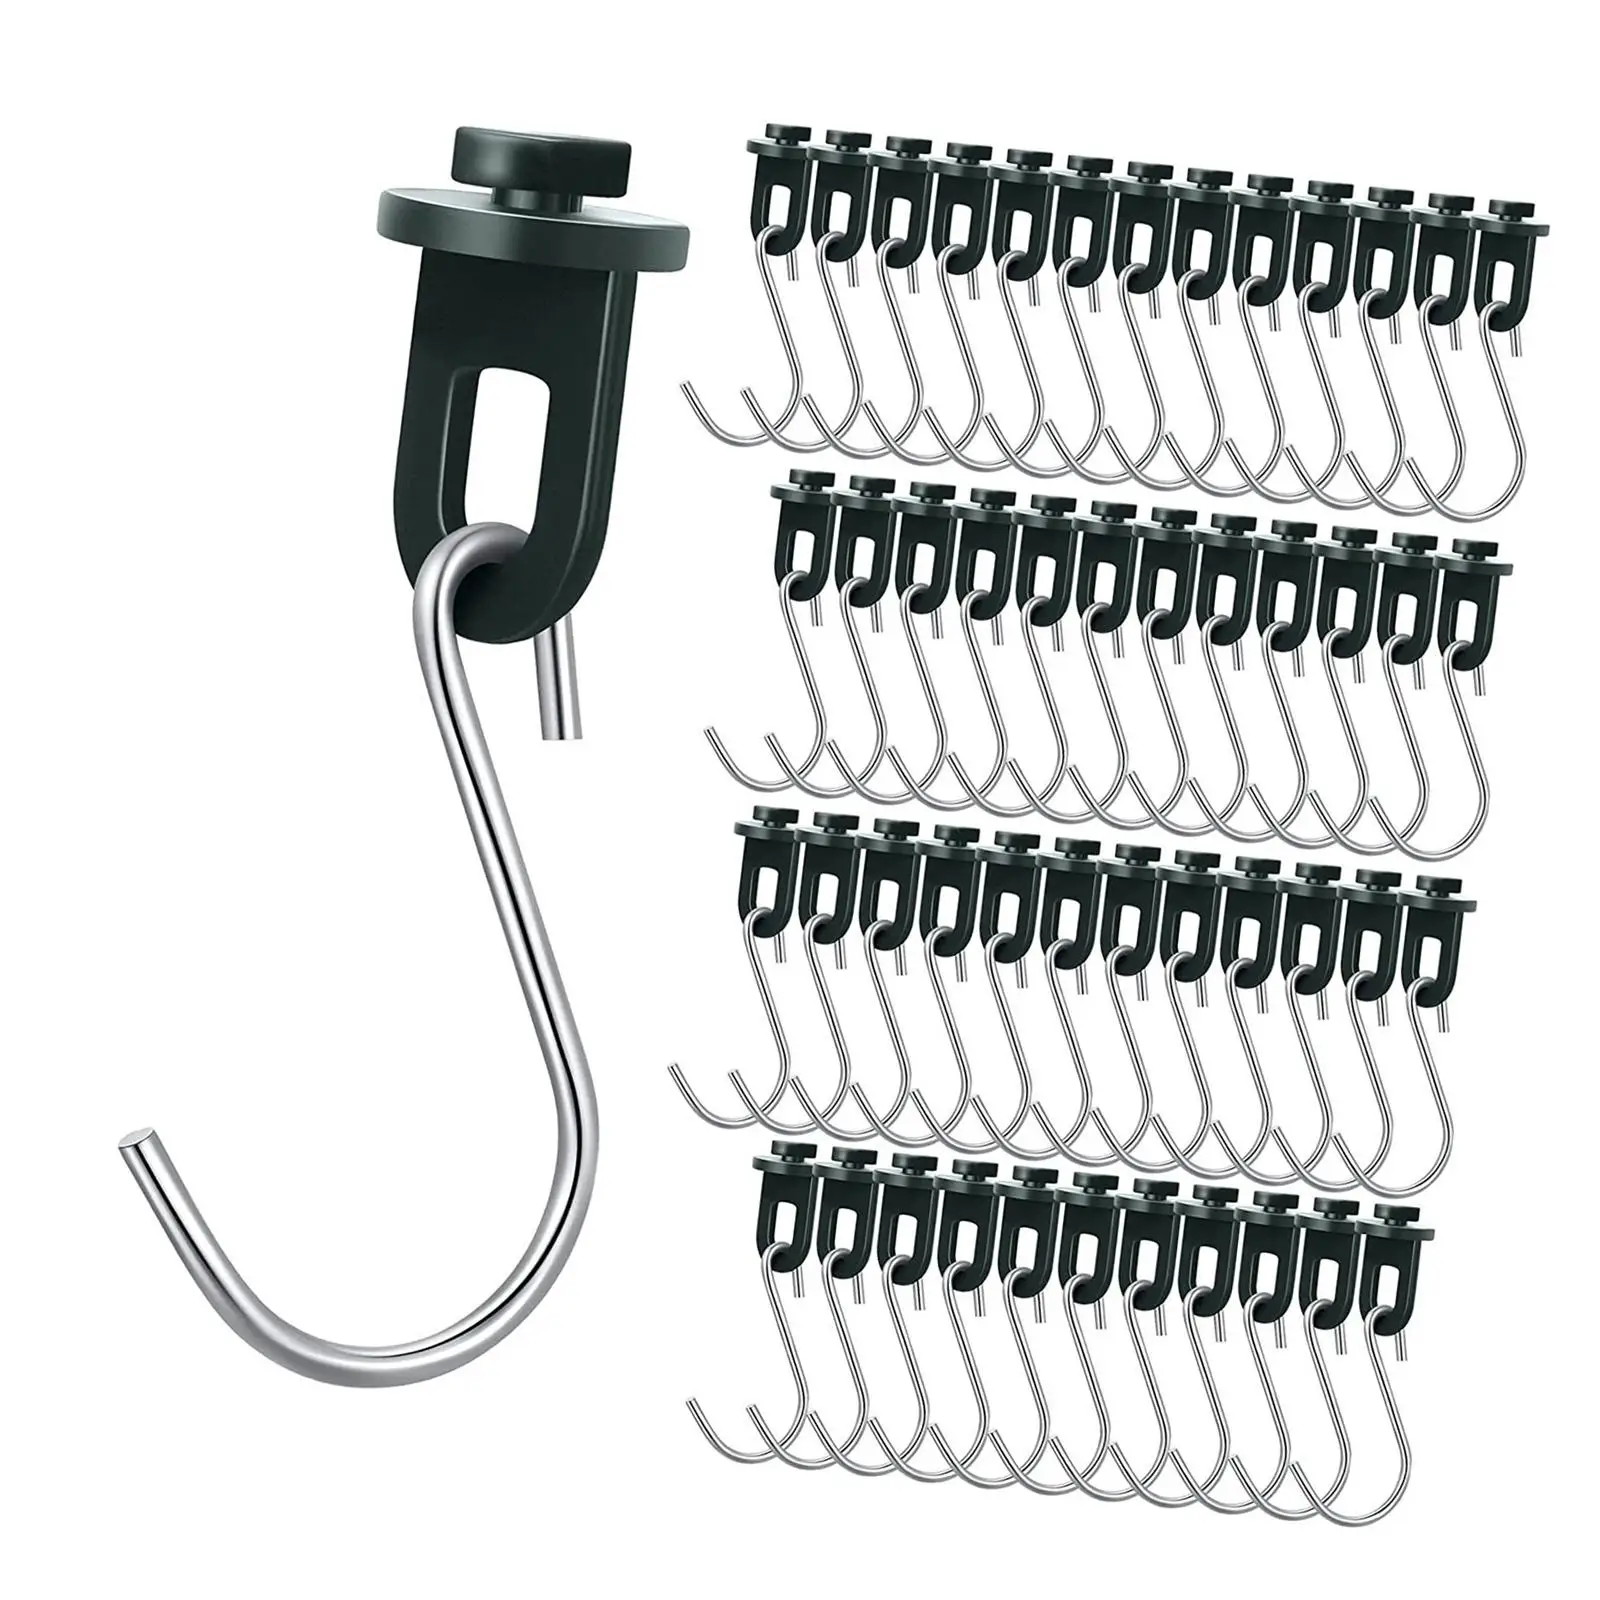 50Pcs Greenhouse Hooks hanger Saving Stainless Steel Hanging Plants Greenhouse Fixing Clips for Handbag Outdoor Clothes